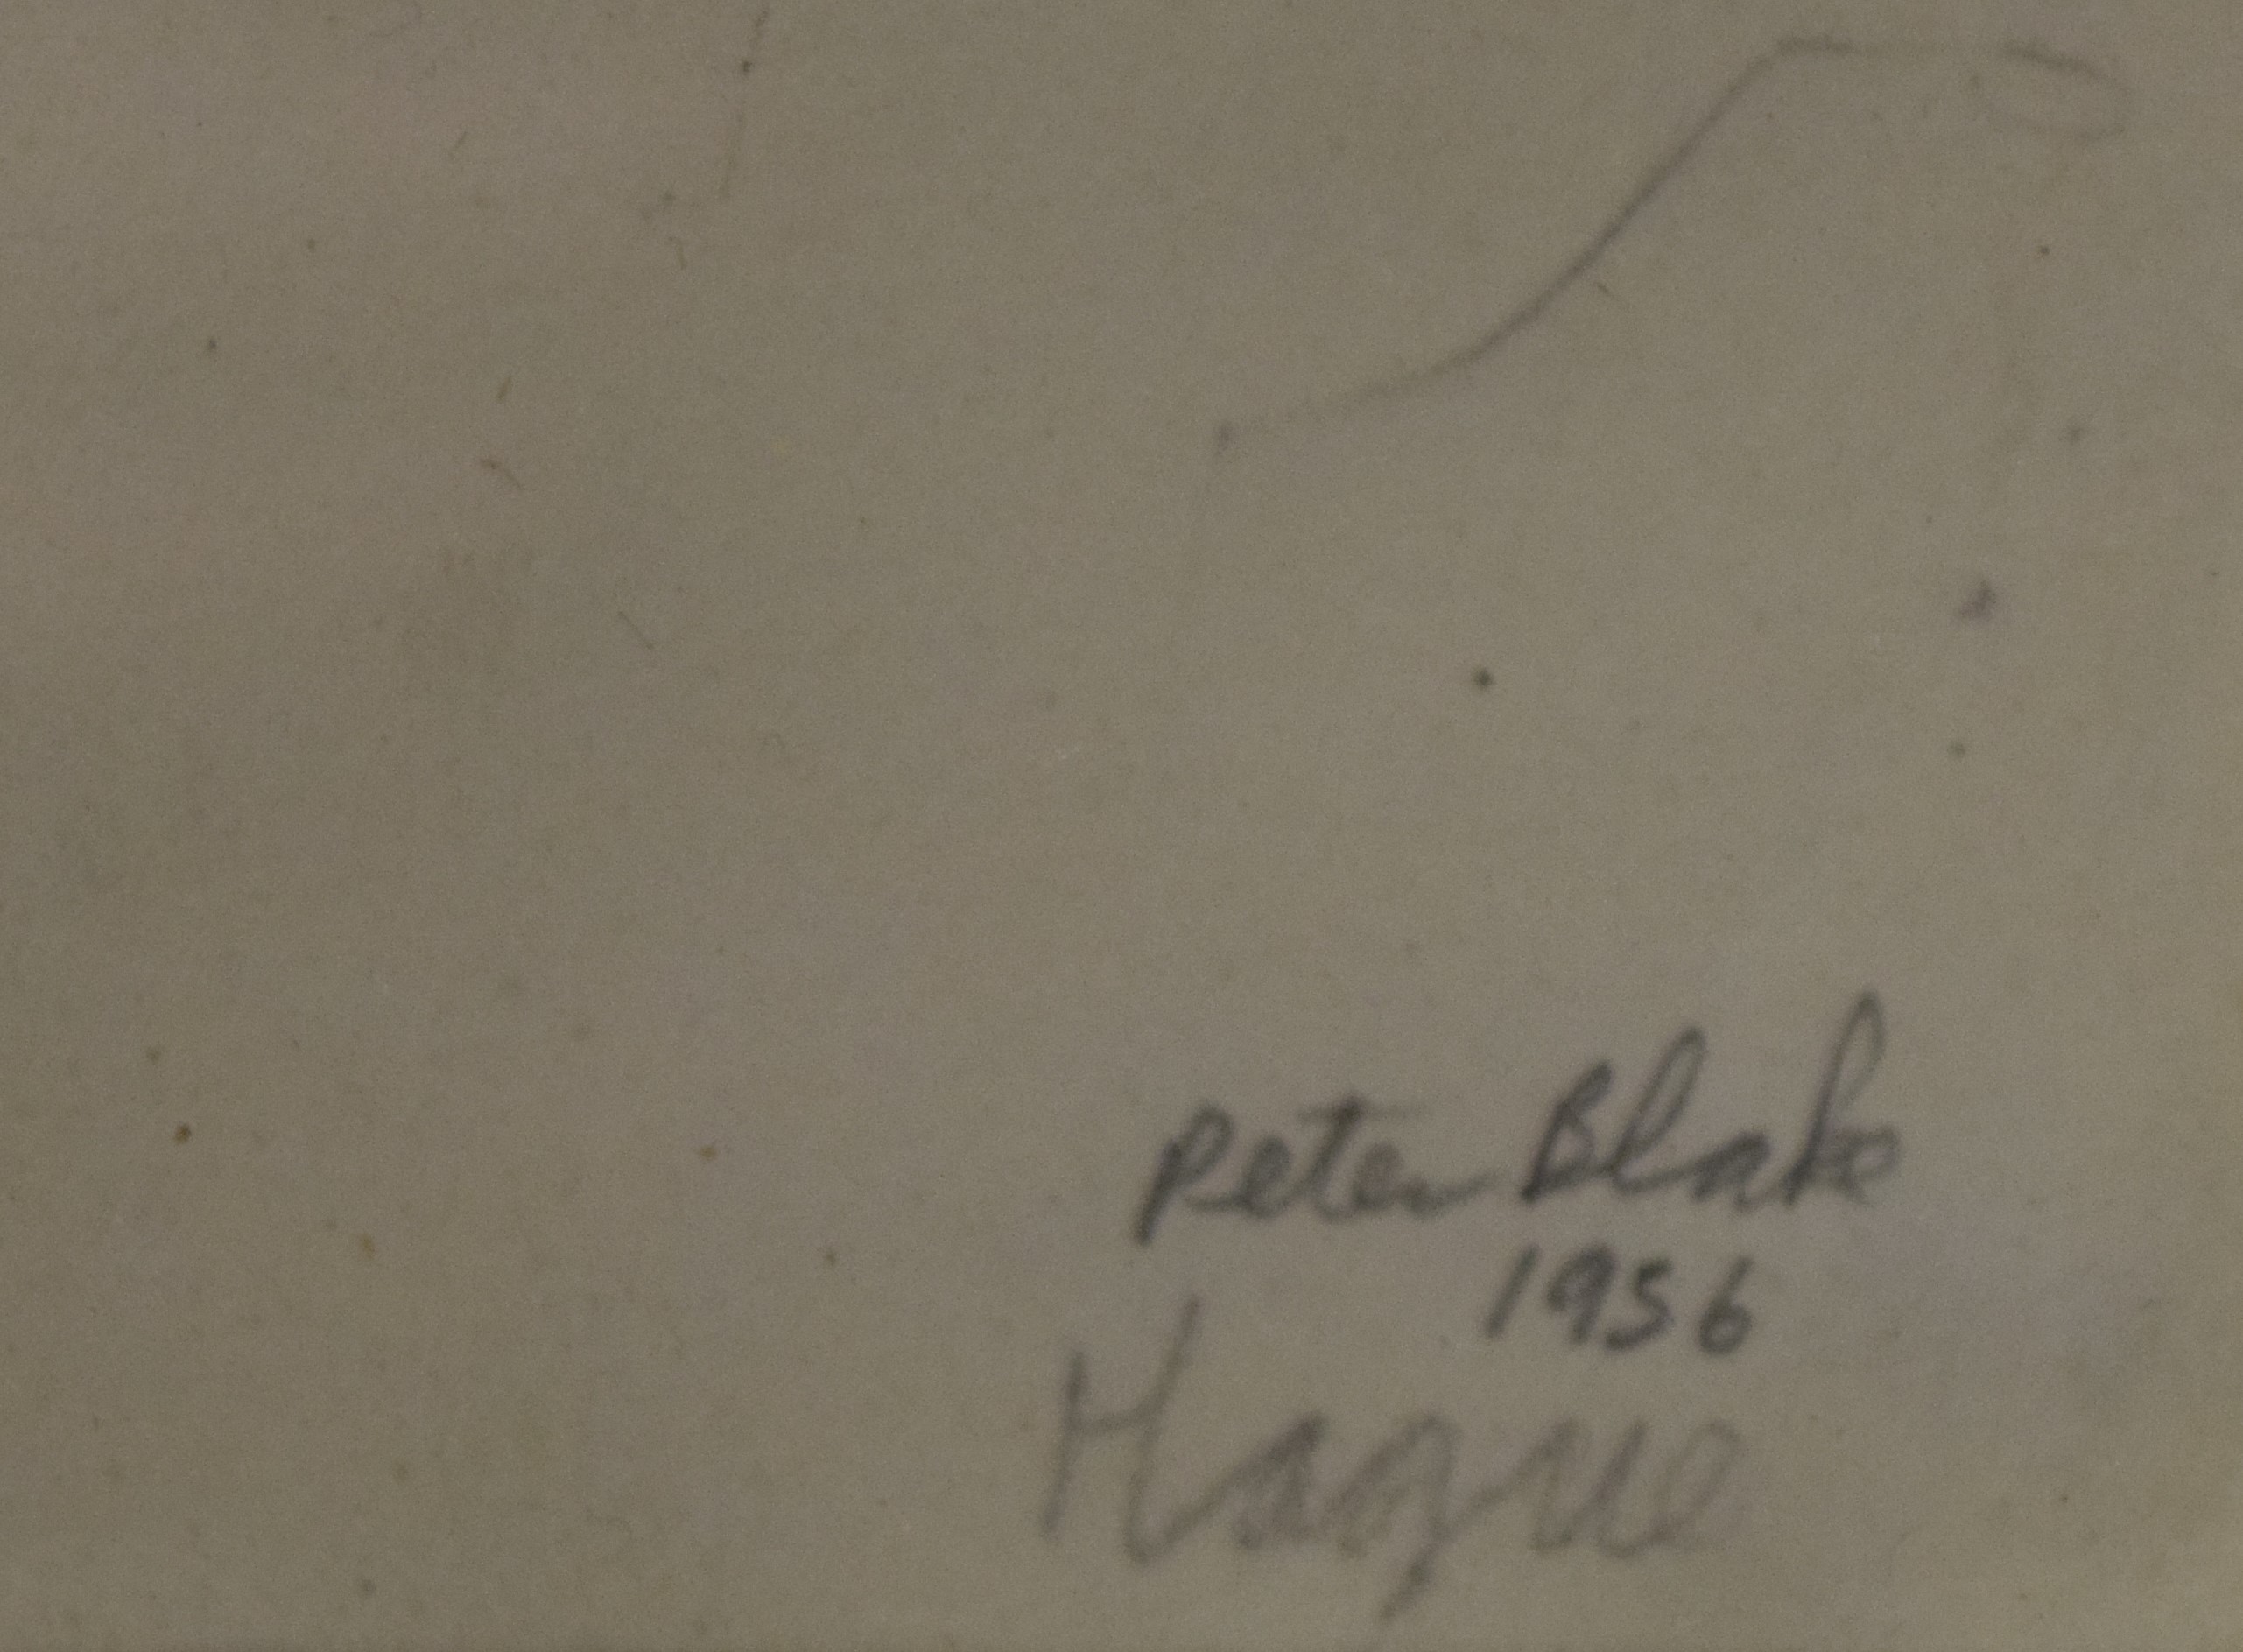 PETER BLAKE (born 1932) British, Hague, pencil sketch on paper, signed and dated 1956, - Image 3 of 3